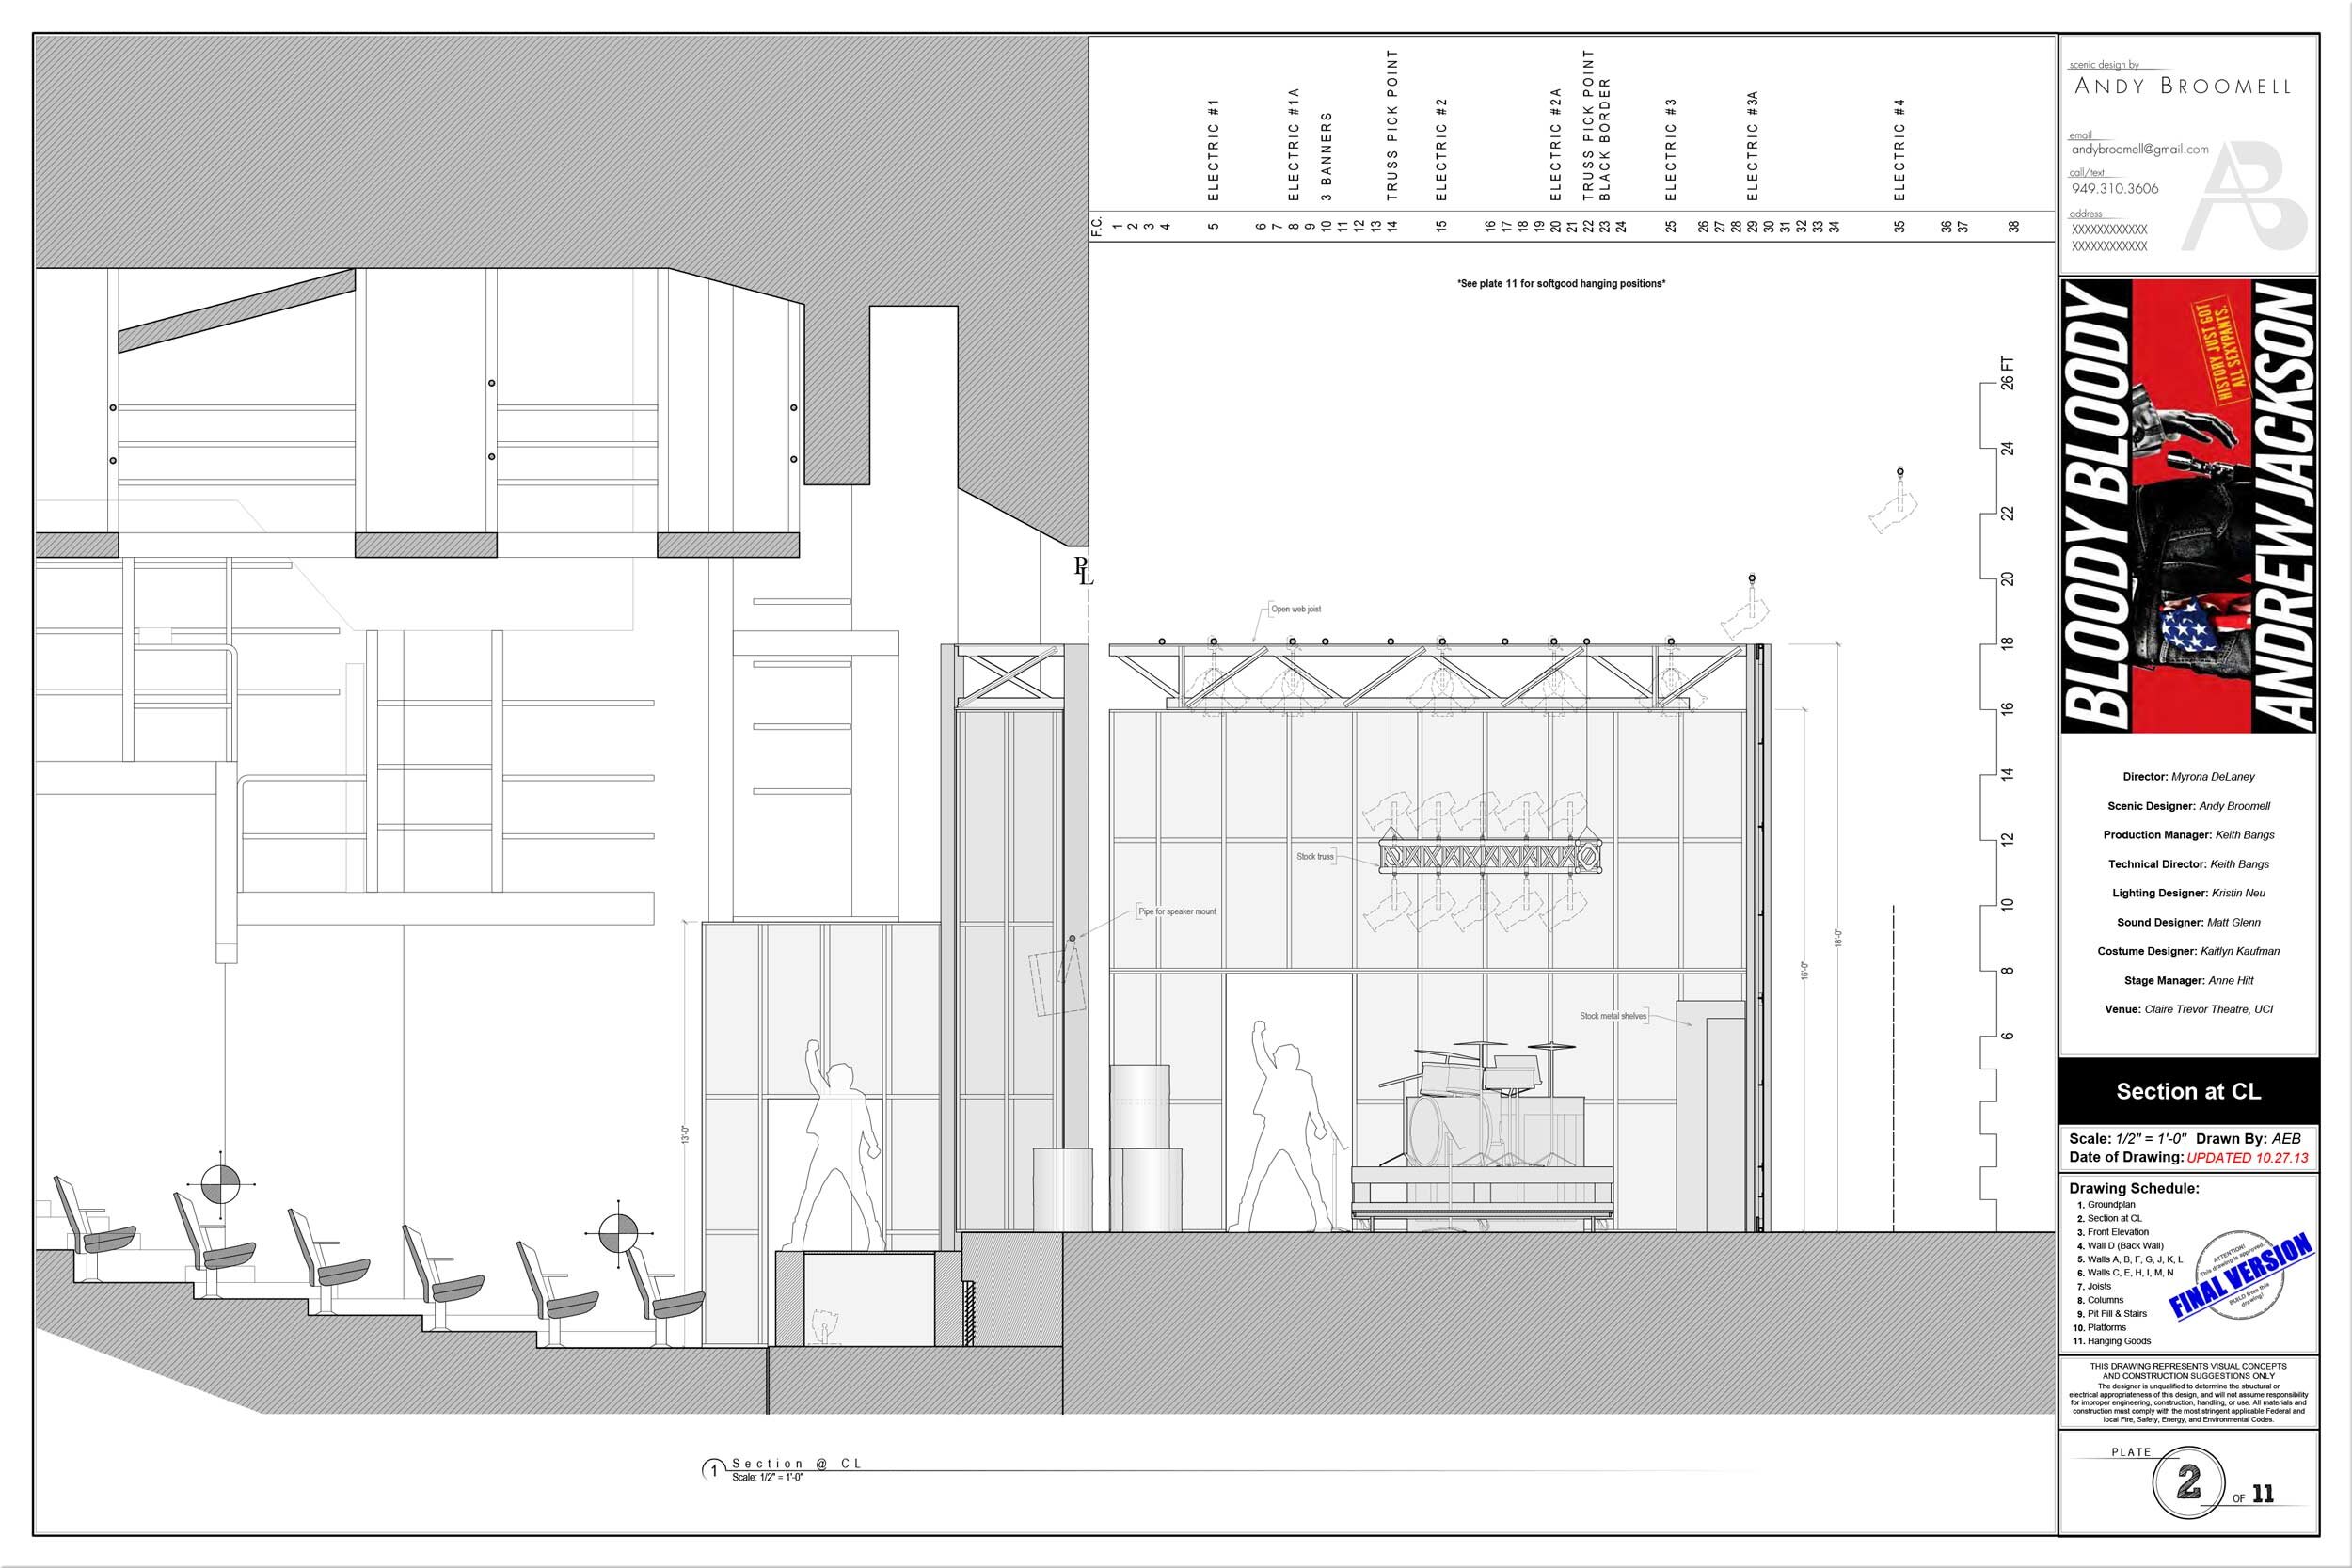 scenic-design-drafting-musical-vectorworks-2-section-andybroomell.jpg